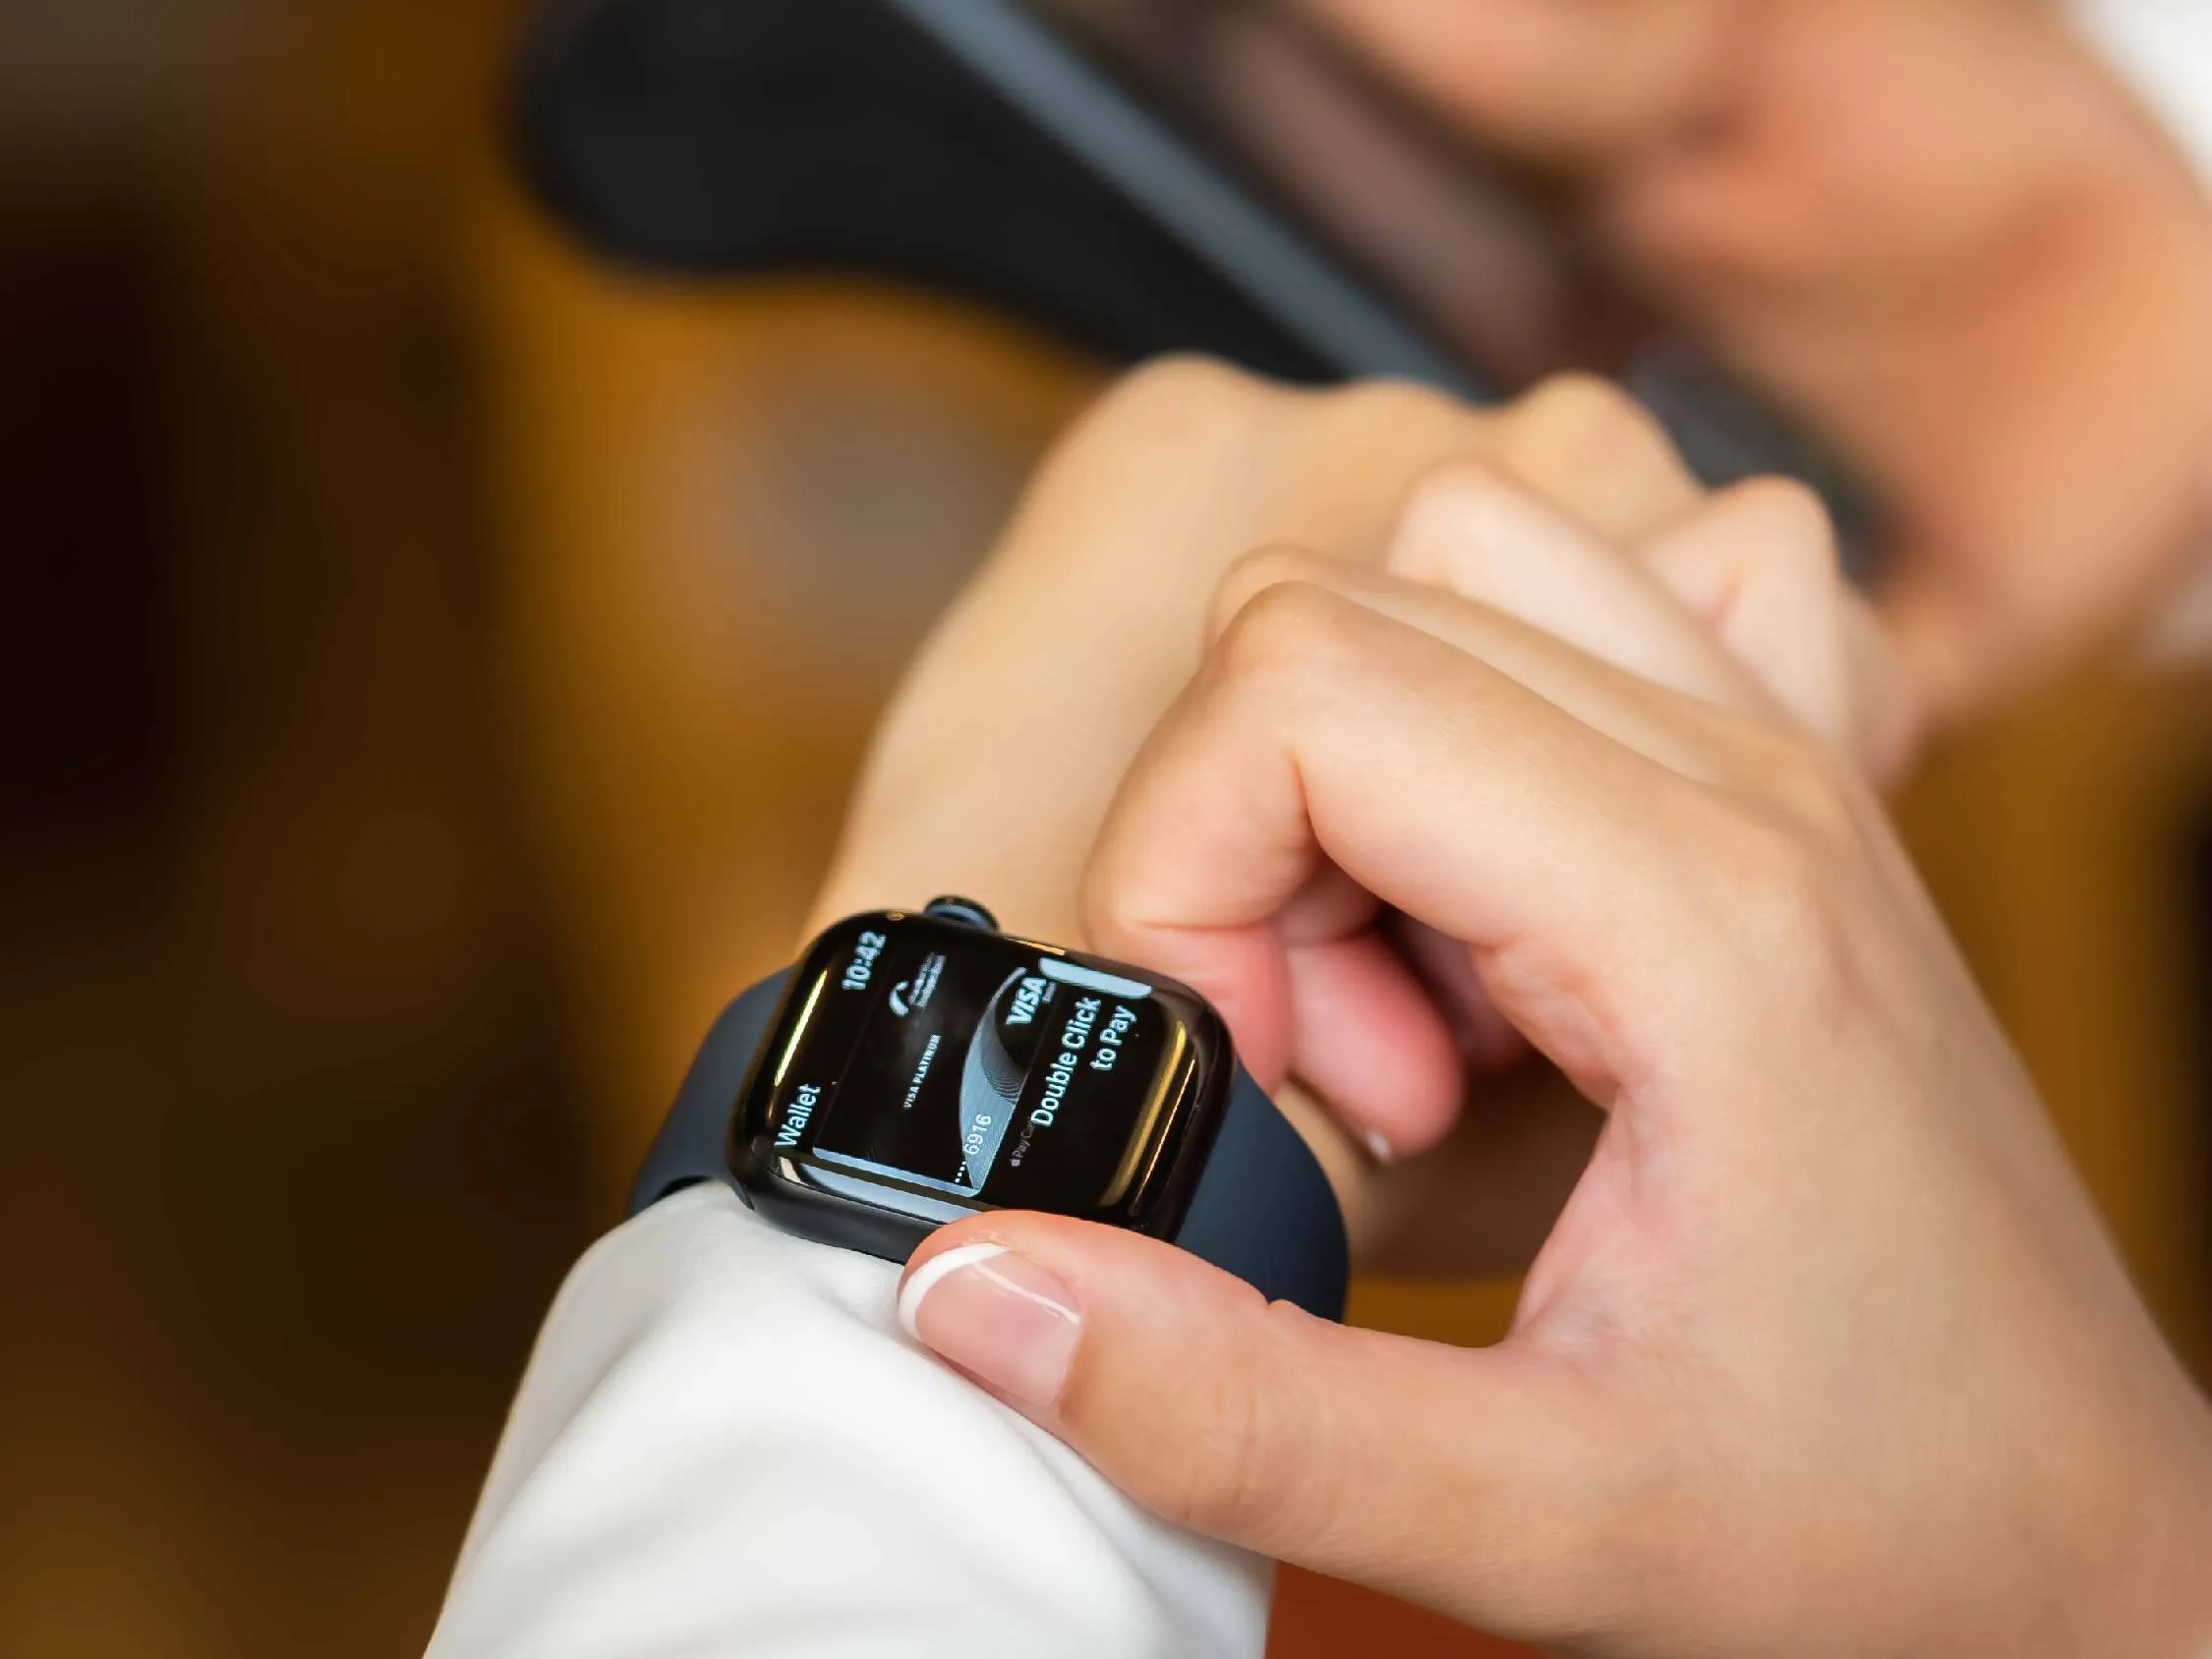 A person accessing a digital wallet to pay cashlessly via a smartwatch